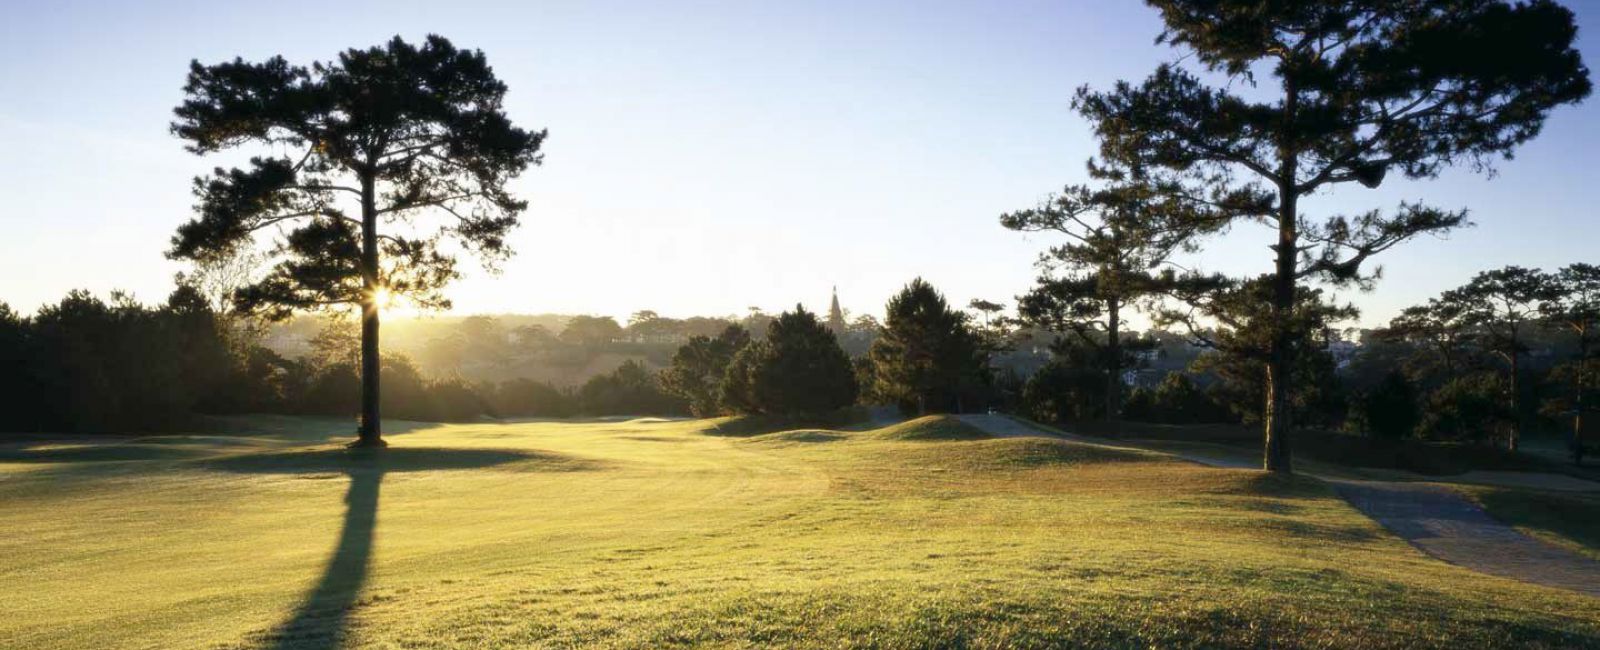 Dalat Stay And Play 3 Days 2 Nights 2 Rounds – Hotel Du Parc